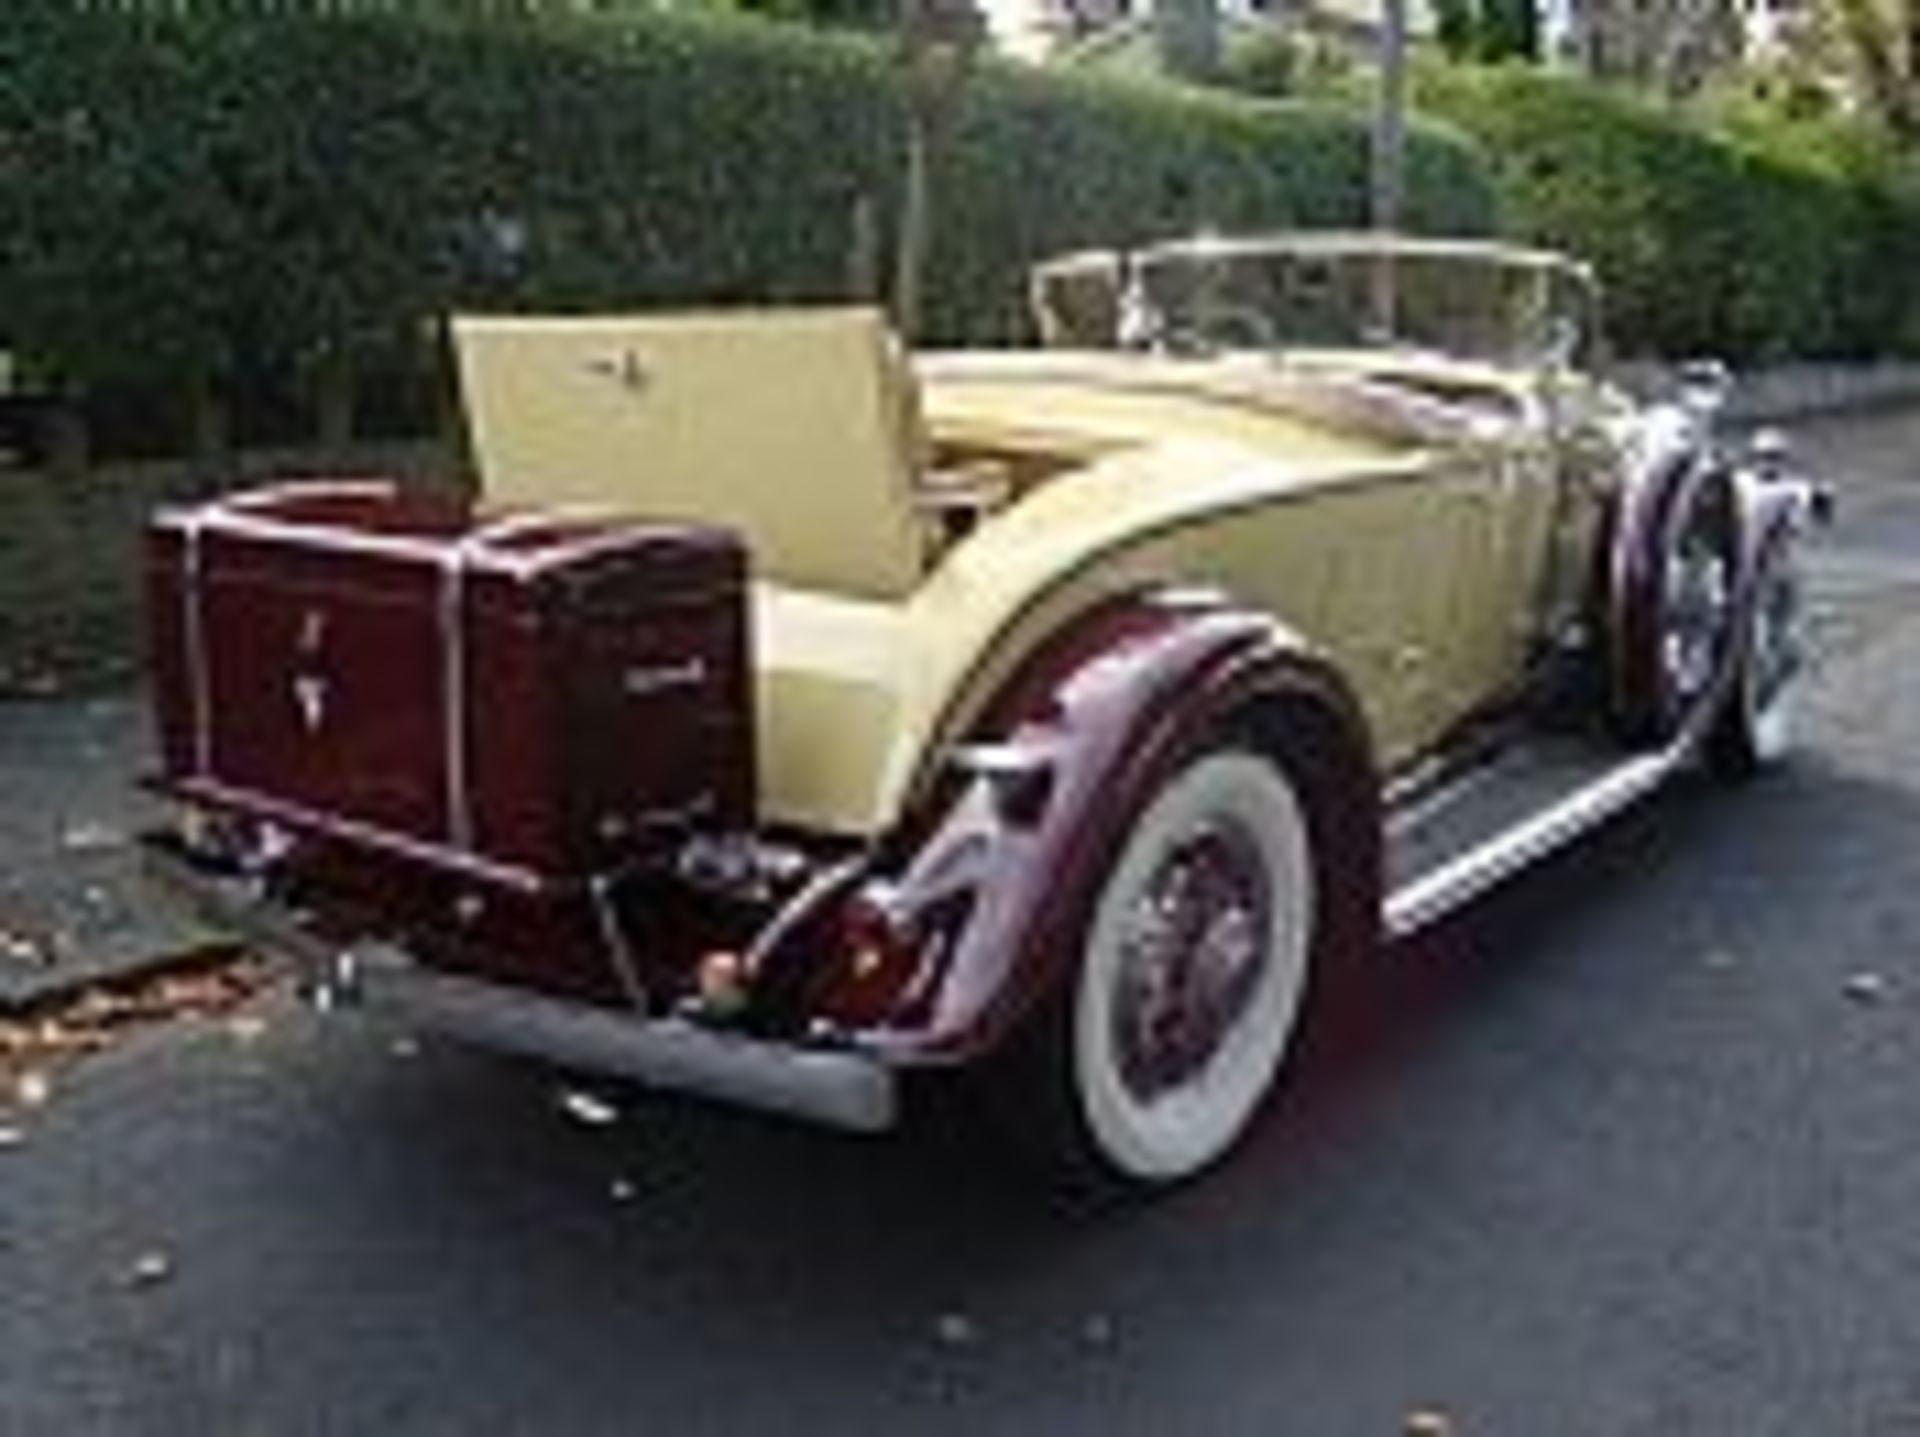 1931 Cadillac 370 A Roadster - Unbelievably Rare! - Image 2 of 4